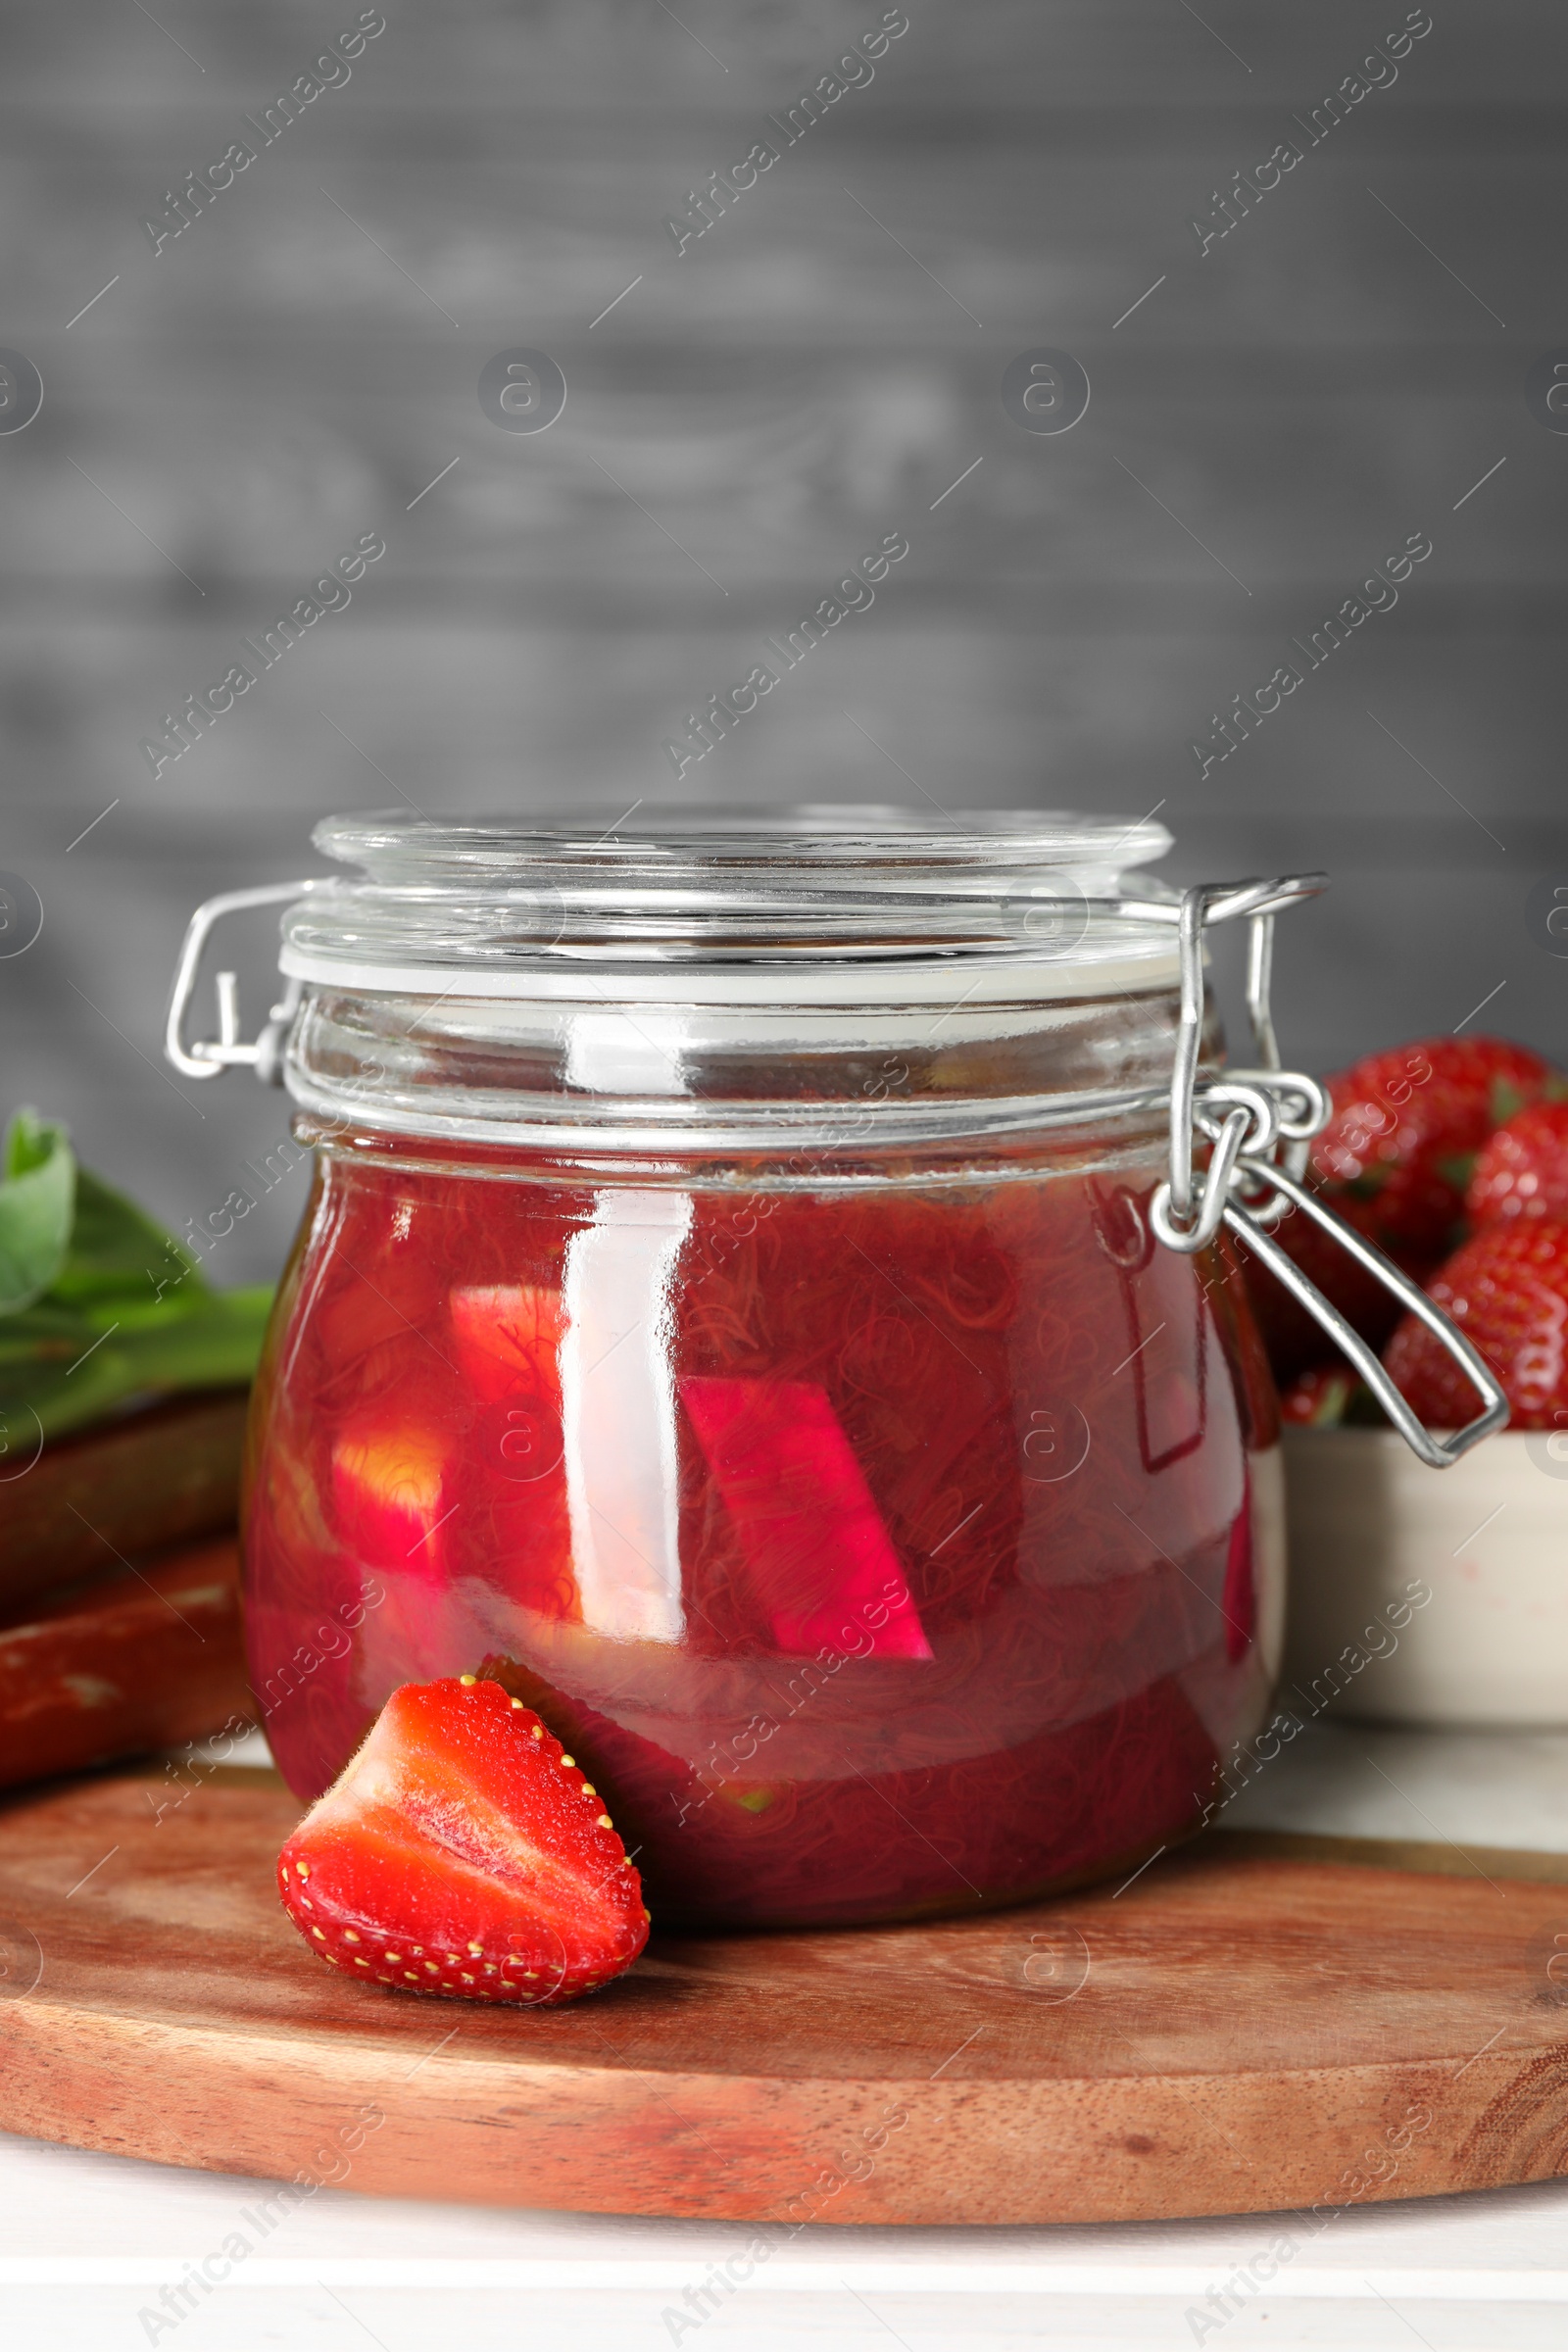 Photo of Jar of tasty rhubarb jam and strawberry on white table